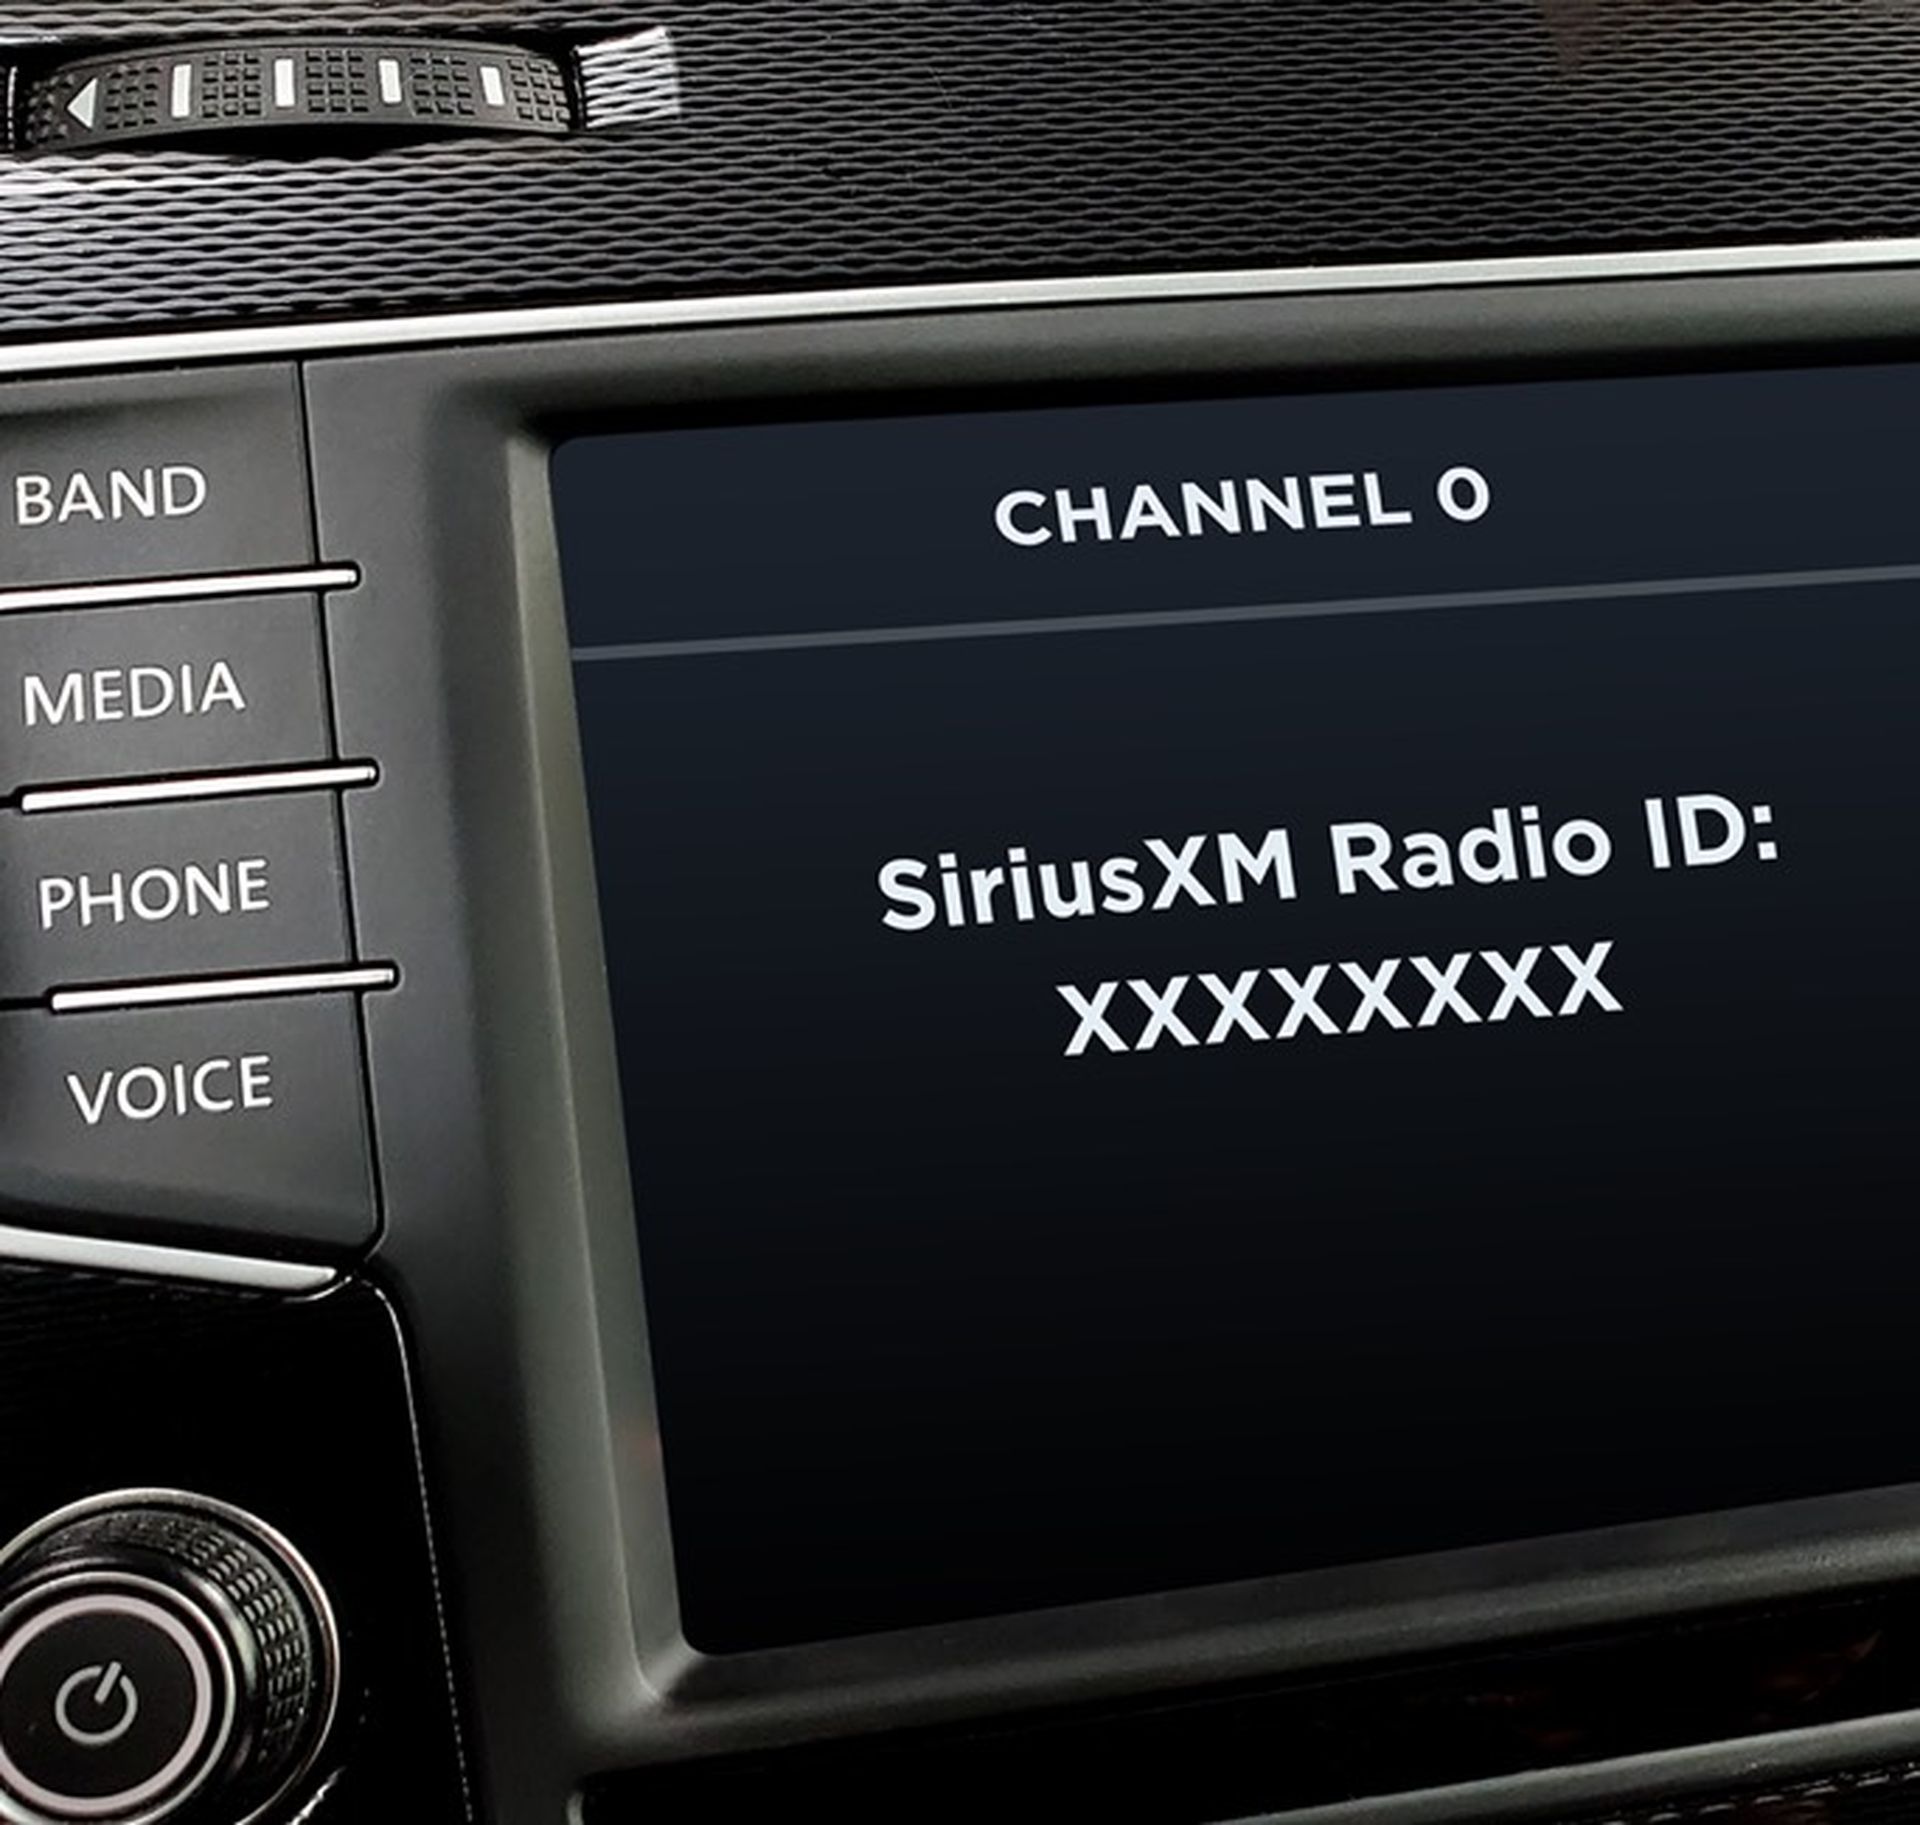 A Sirius XM bug caused security flaws in self-driving cars